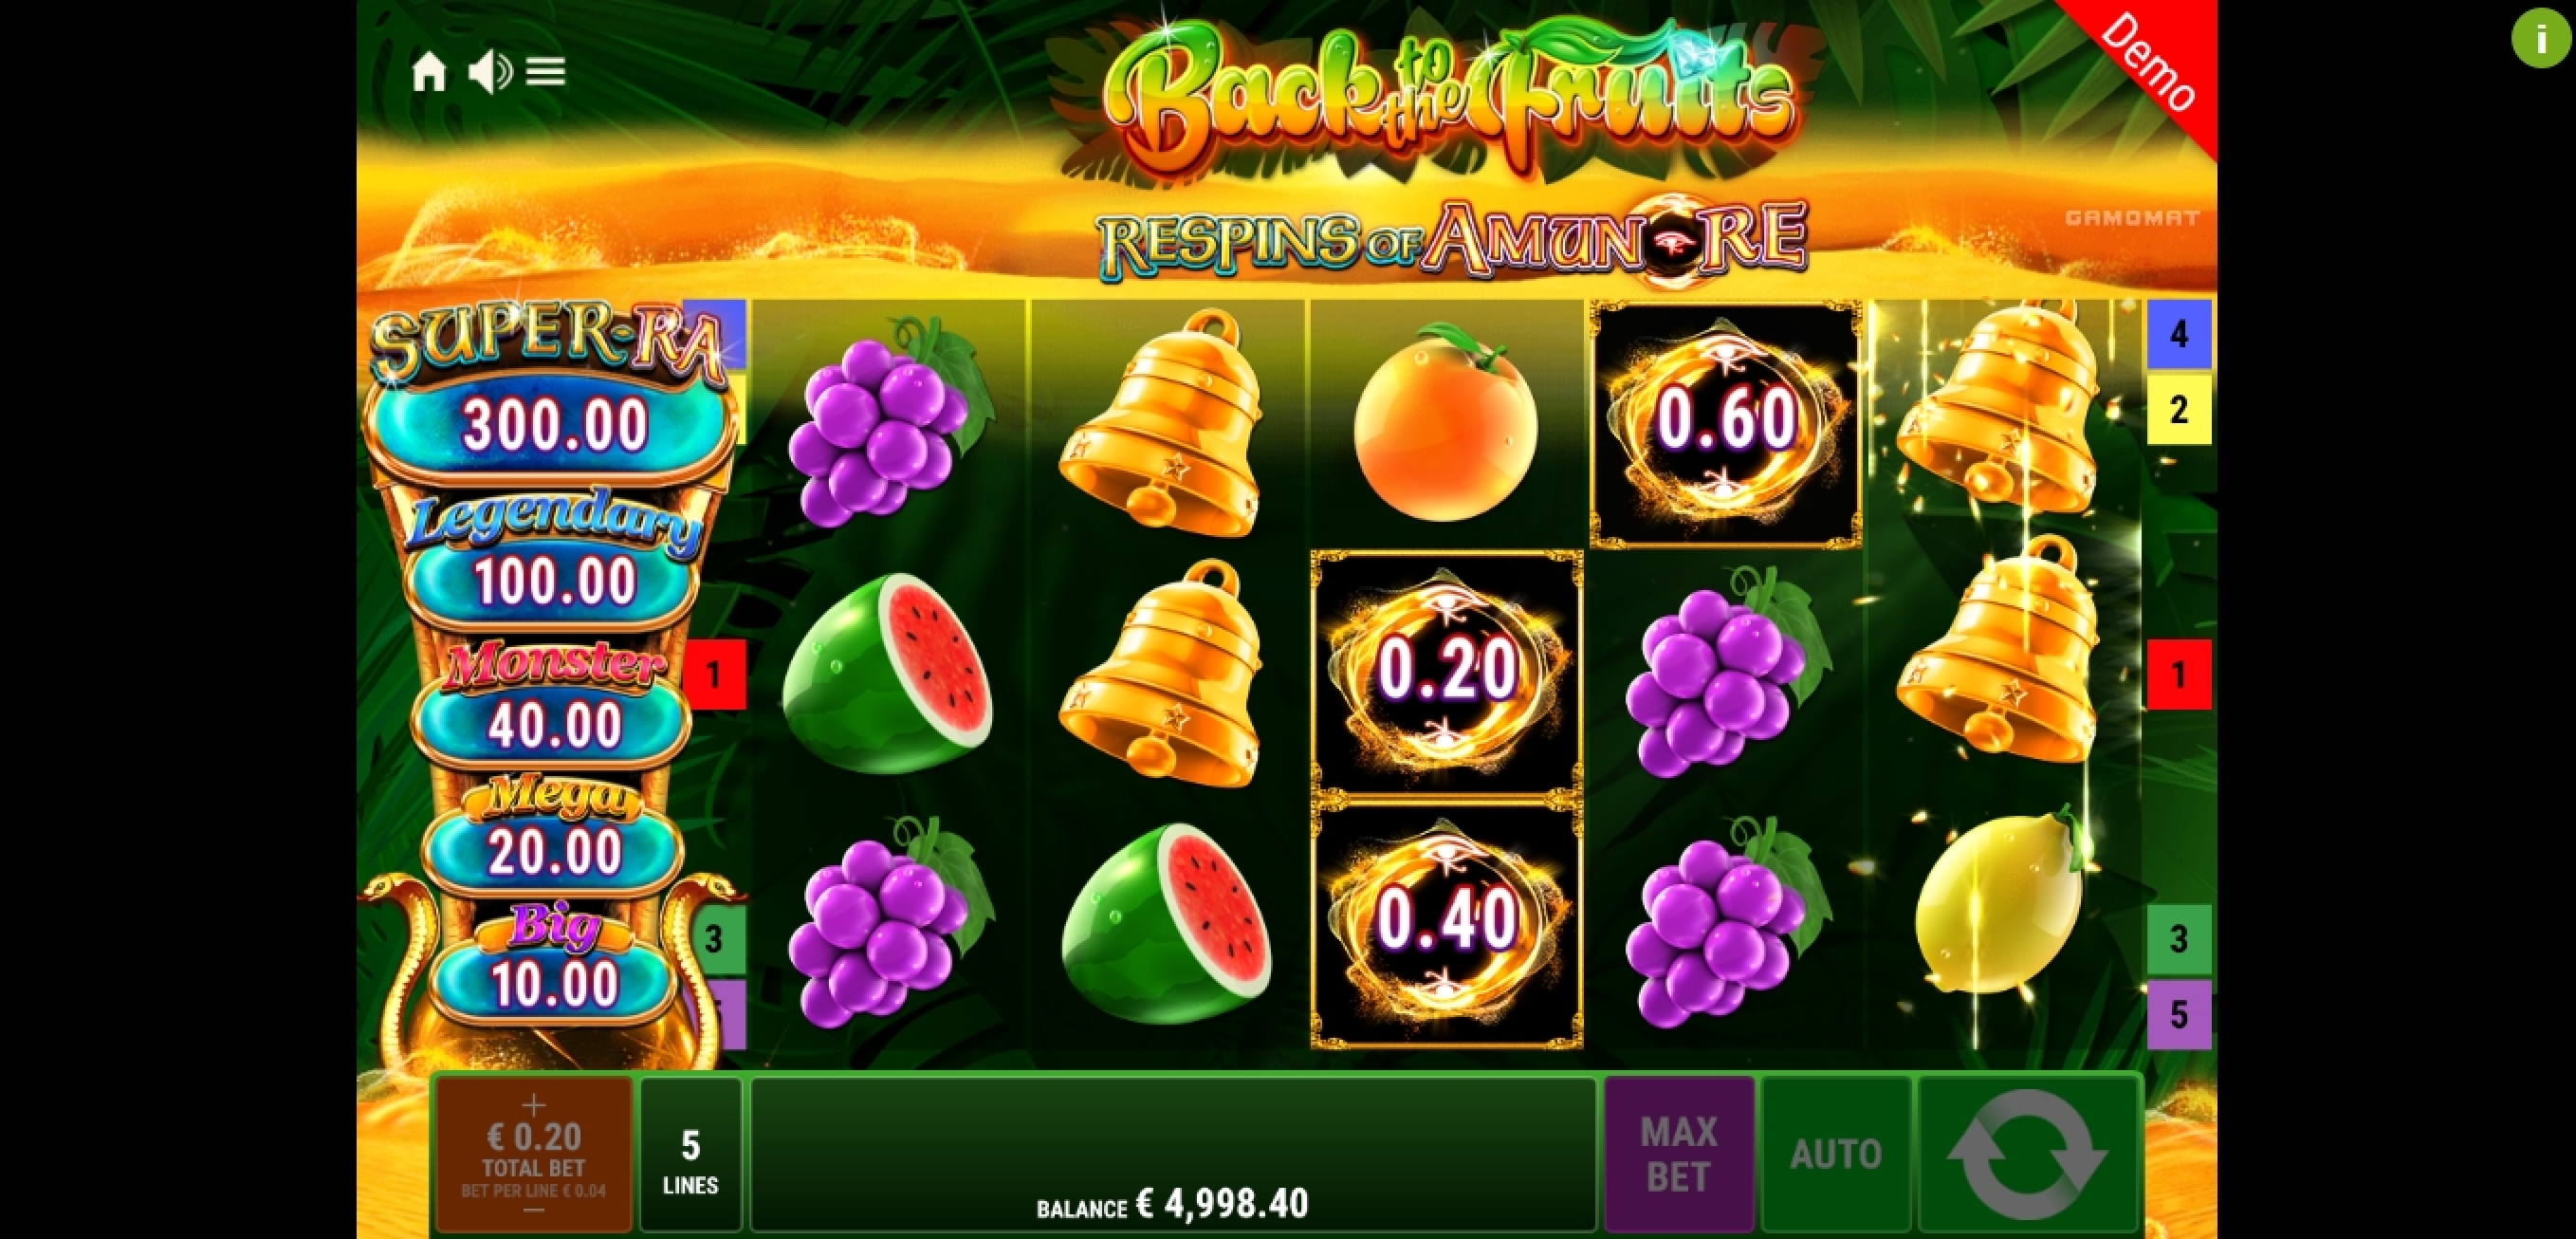 Win Money in Back to the Fruits Respins of Amun-Re Free Slot Game by Gamomat